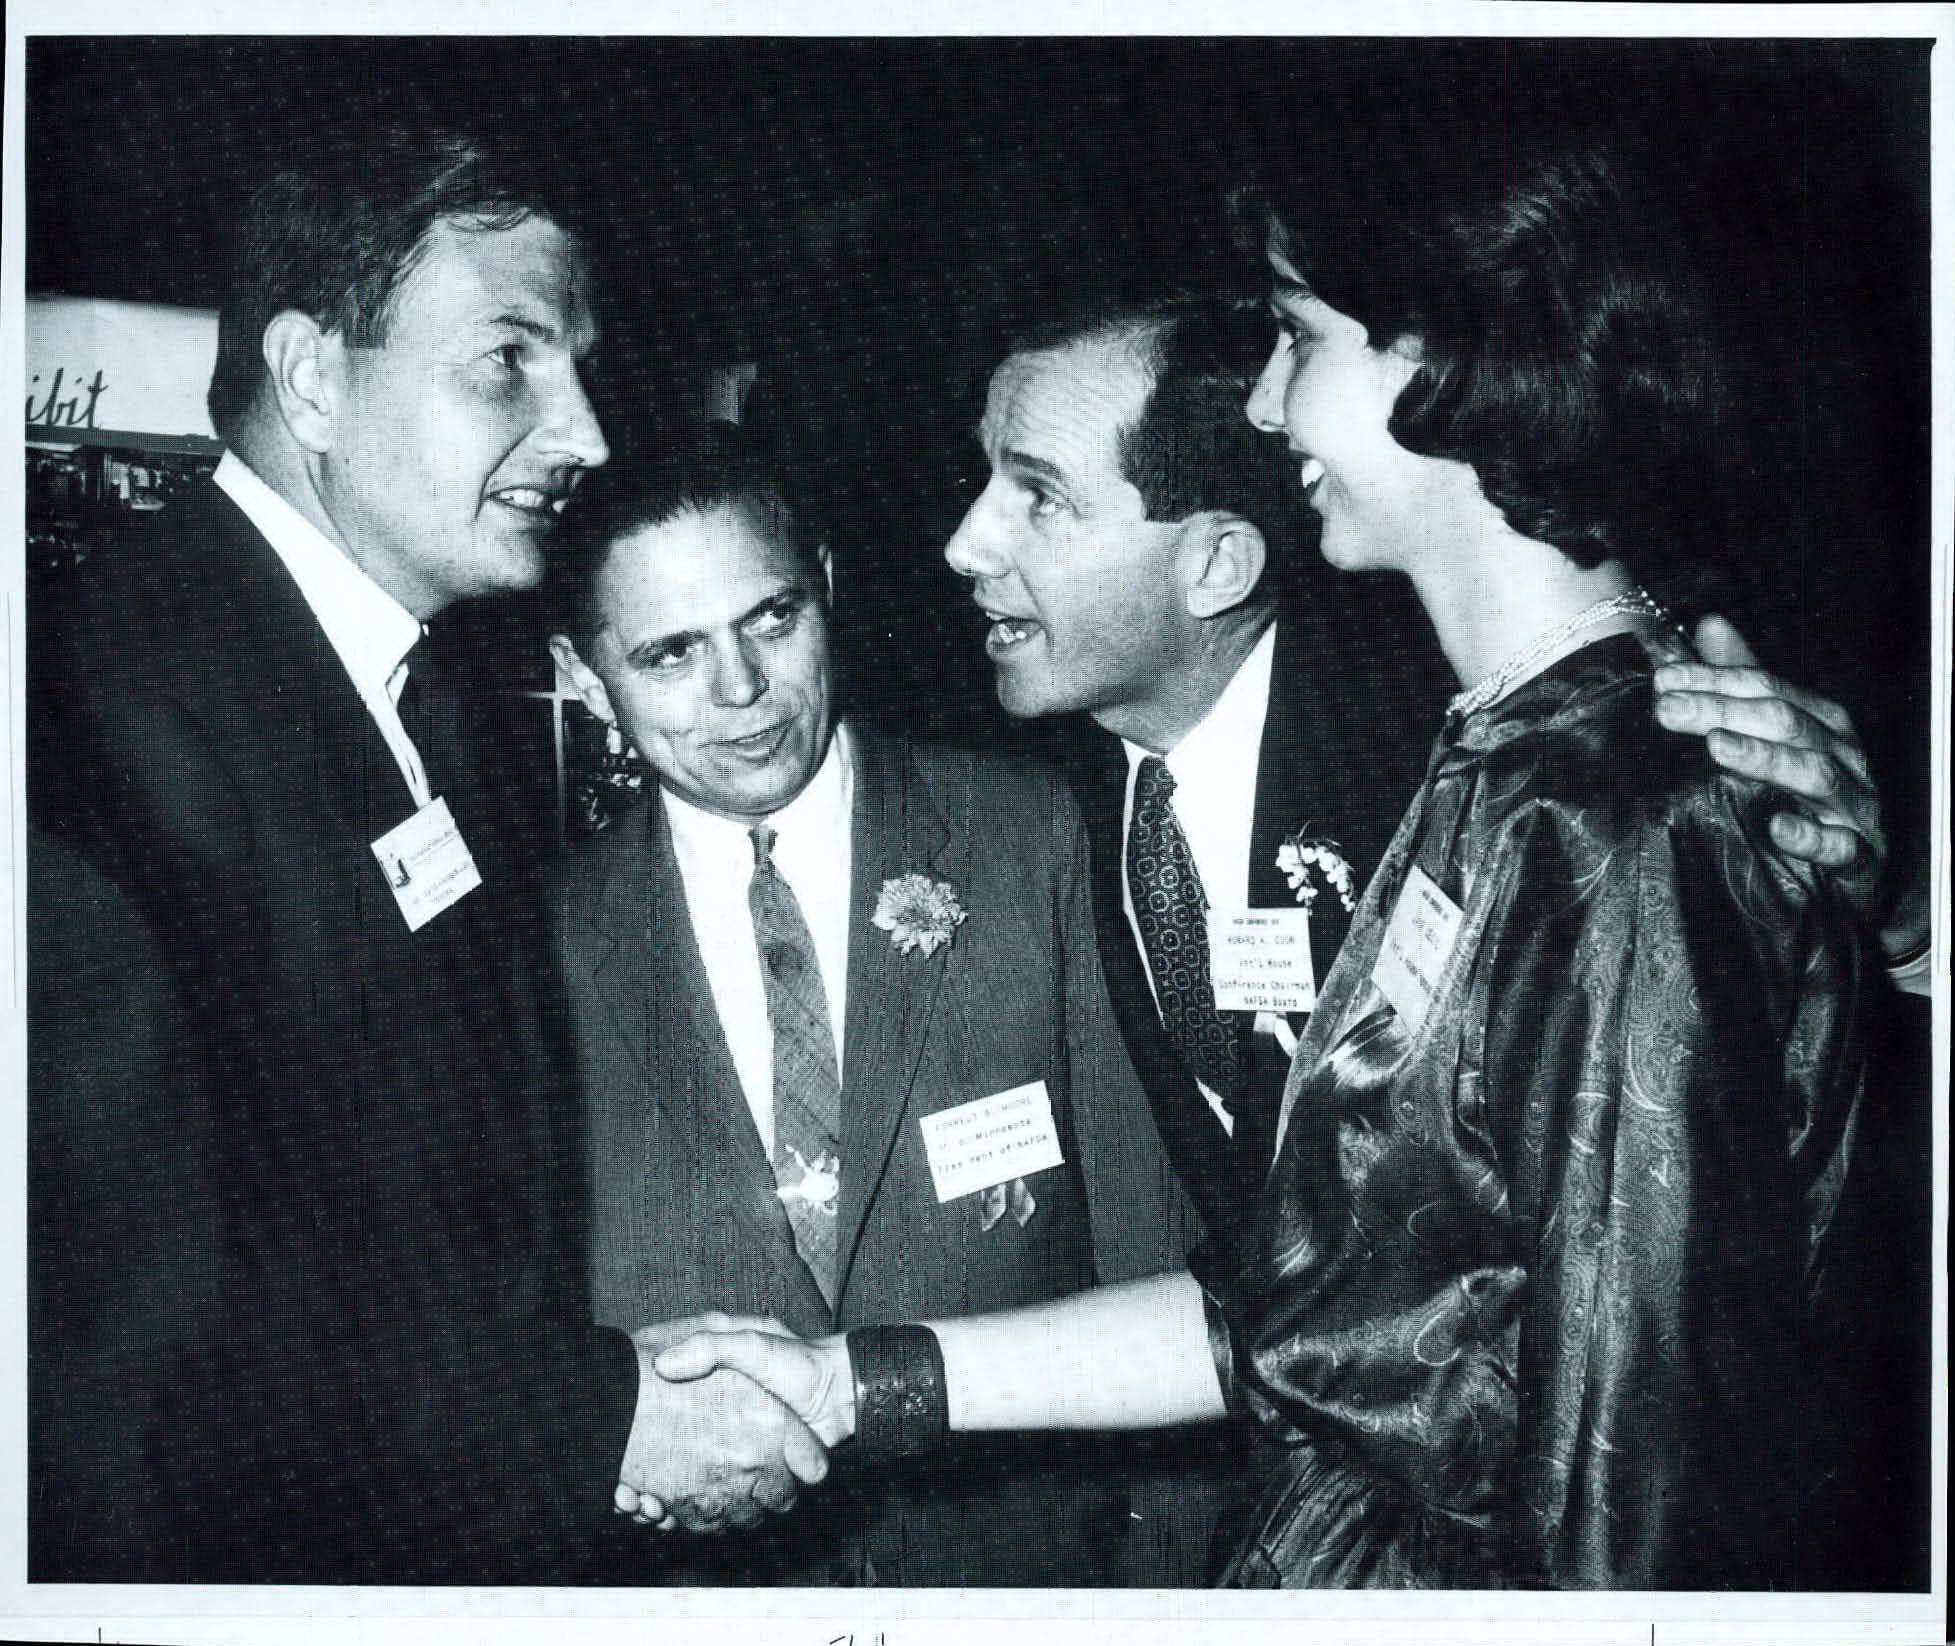 NAFSA members David Rockefeller, Forrest Moore, Howard Cole, and “Jane Doe” gather at the 11th annual conference in New York City in 1959.